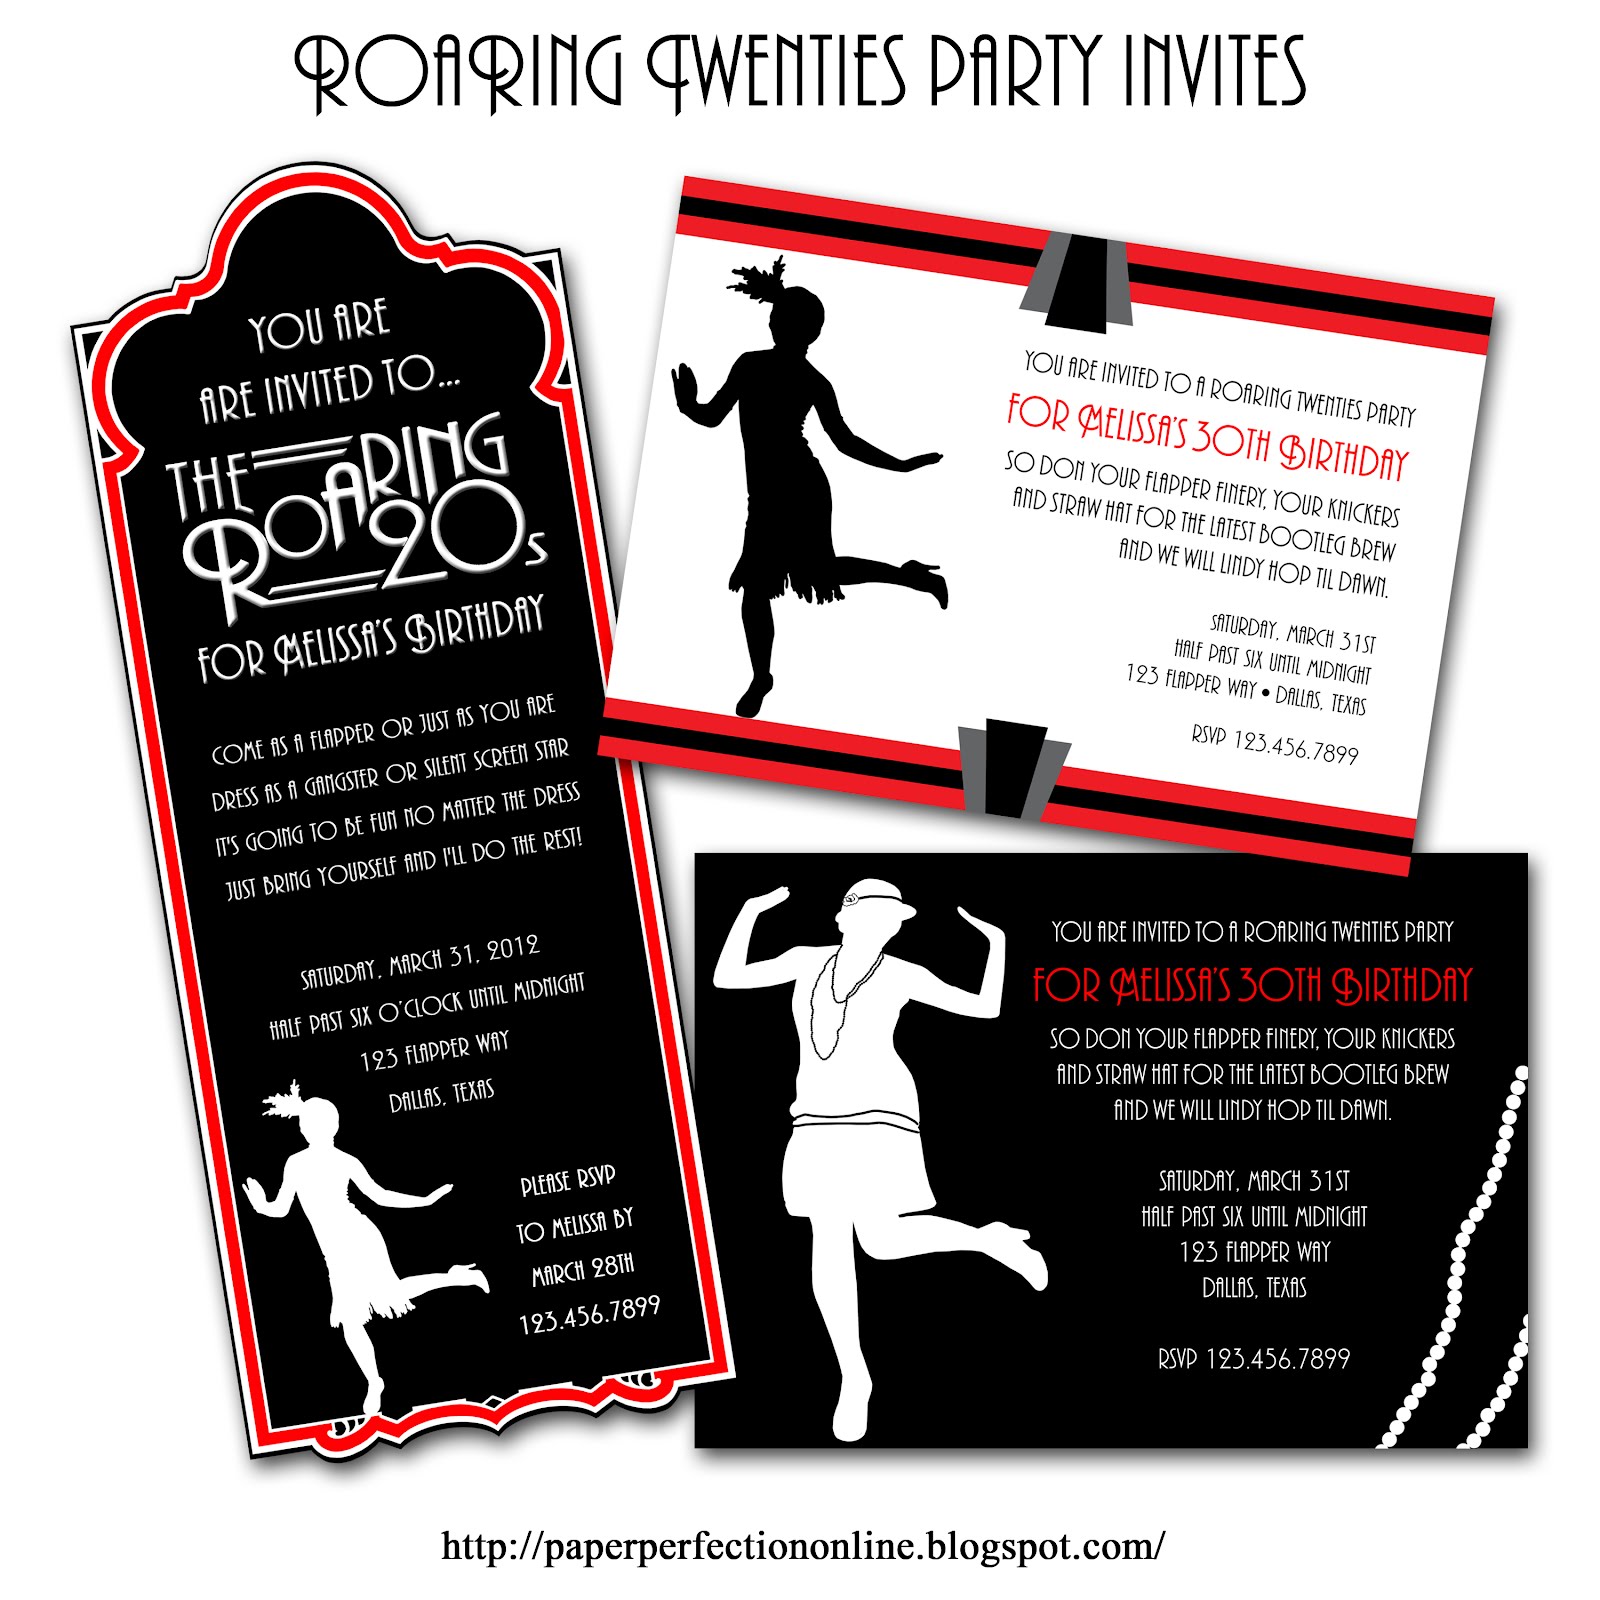 paper-perfection-roaring-twenties-1920s-party-invitations-and-party